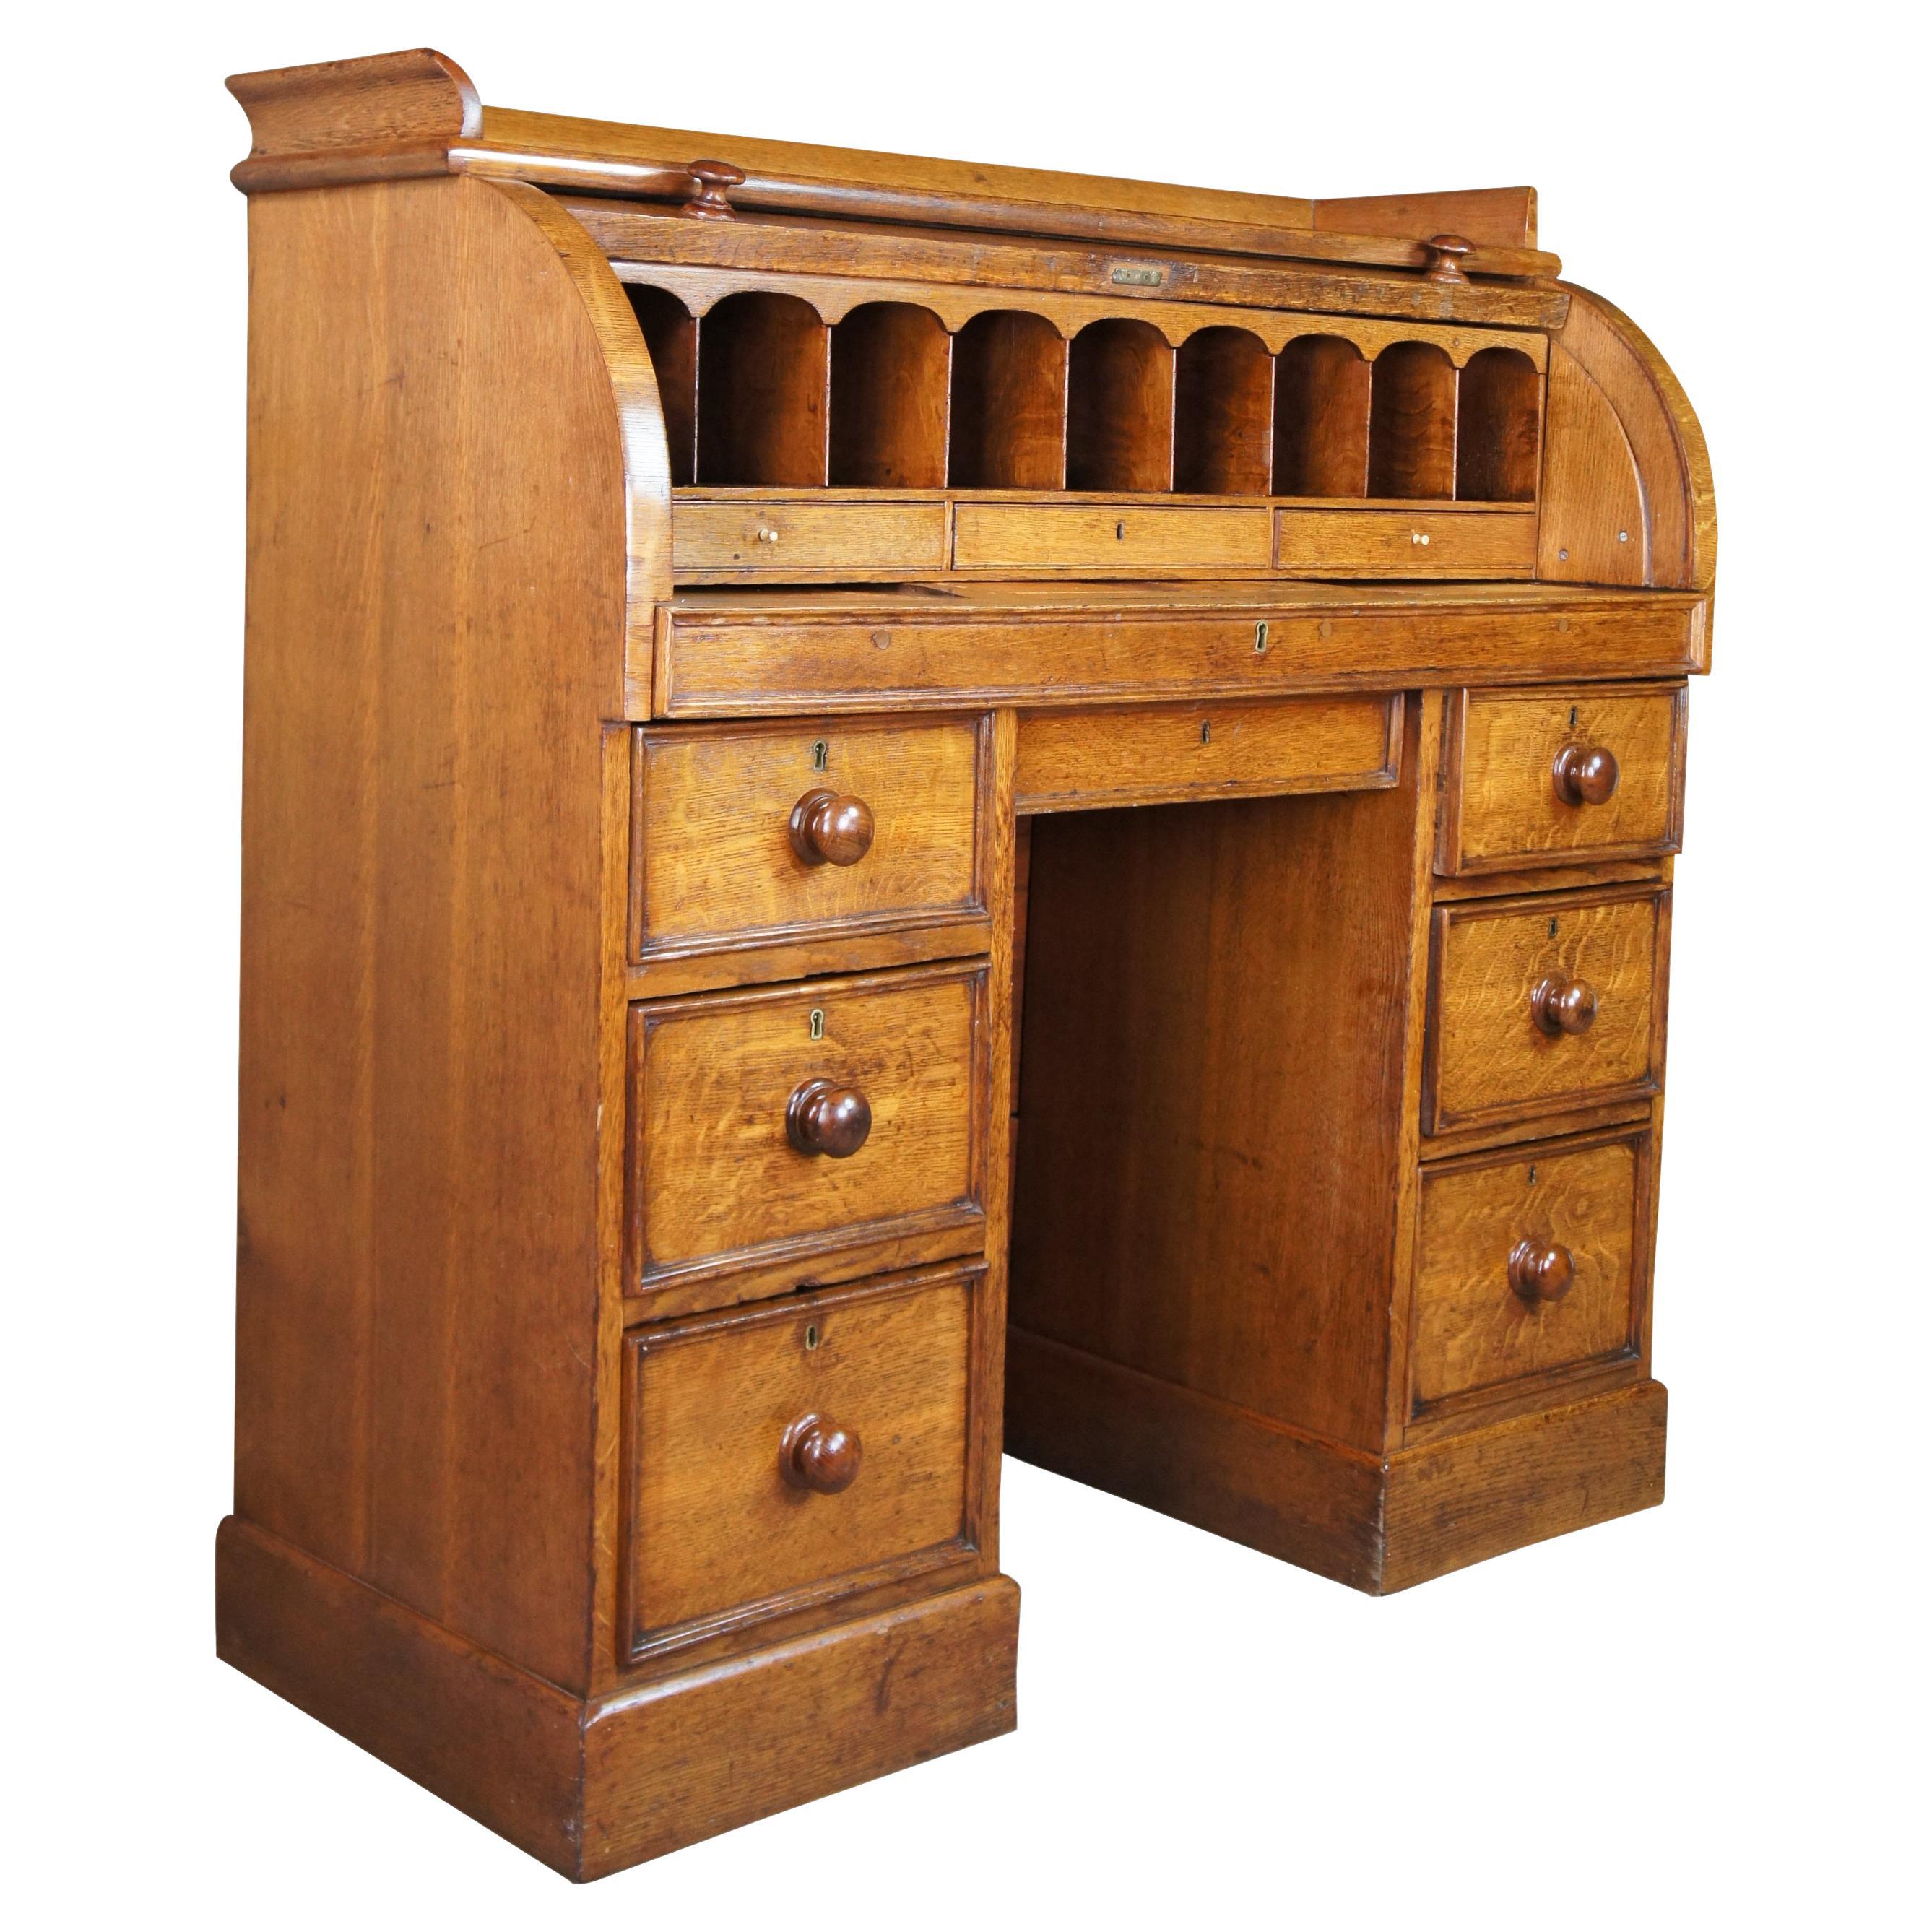 Antique 19thC English Victorian Hobbs Kneehole Cylinder Roll Writing Bureau Desk For Sale